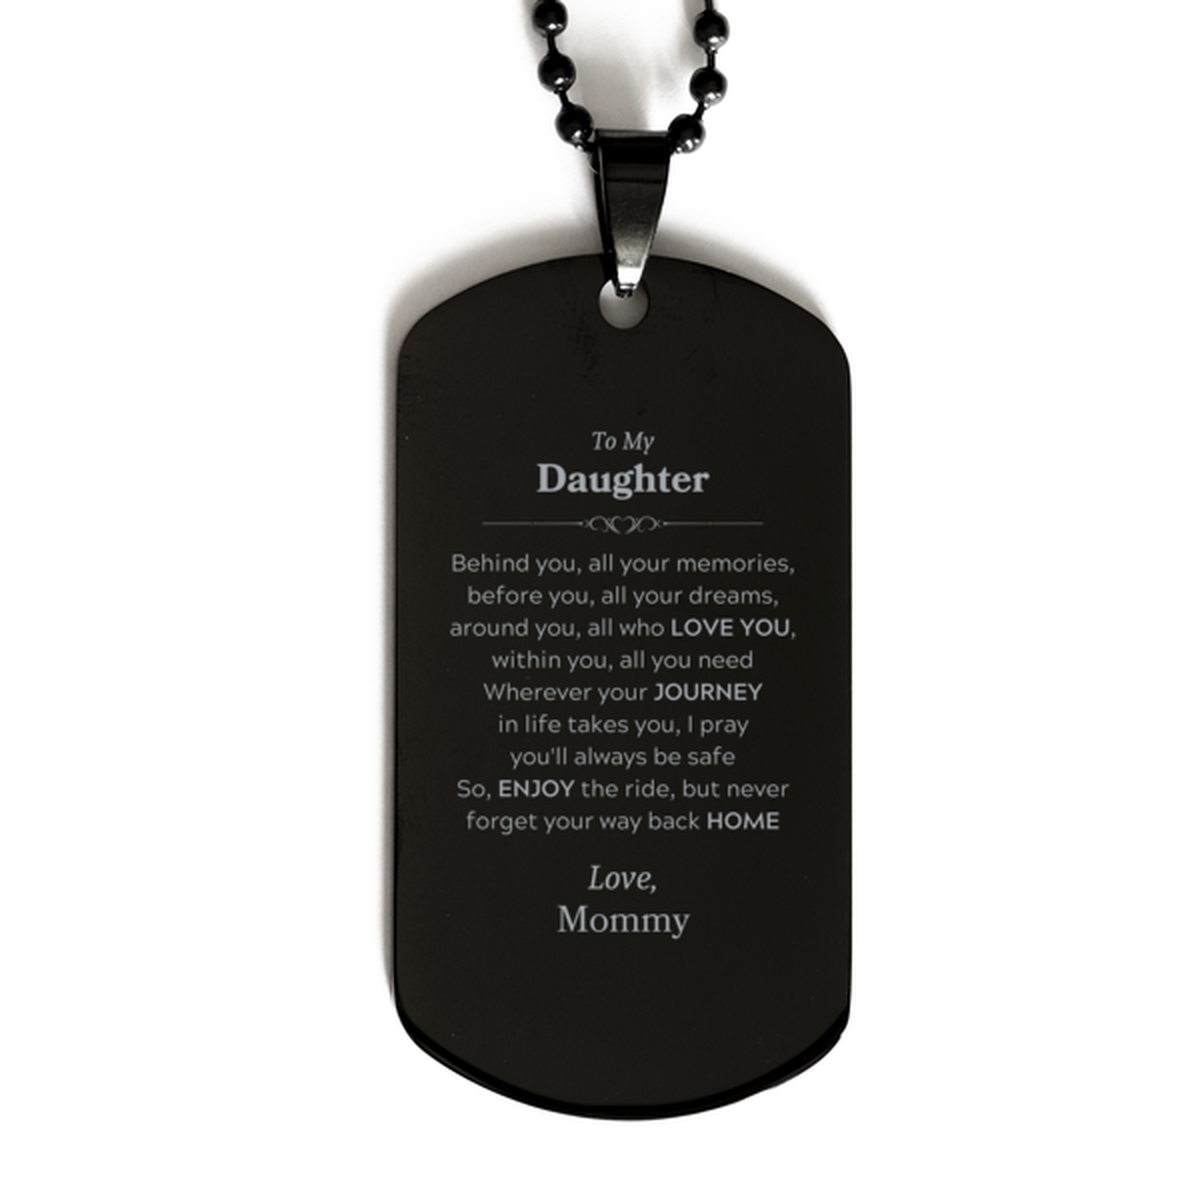 To My Daughter Graduation Gifts from Mommy, Daughter Black Dog Tag Christmas Birthday Gifts for Daughter Behind you, all your memories, before you, all your dreams. Love, Mommy